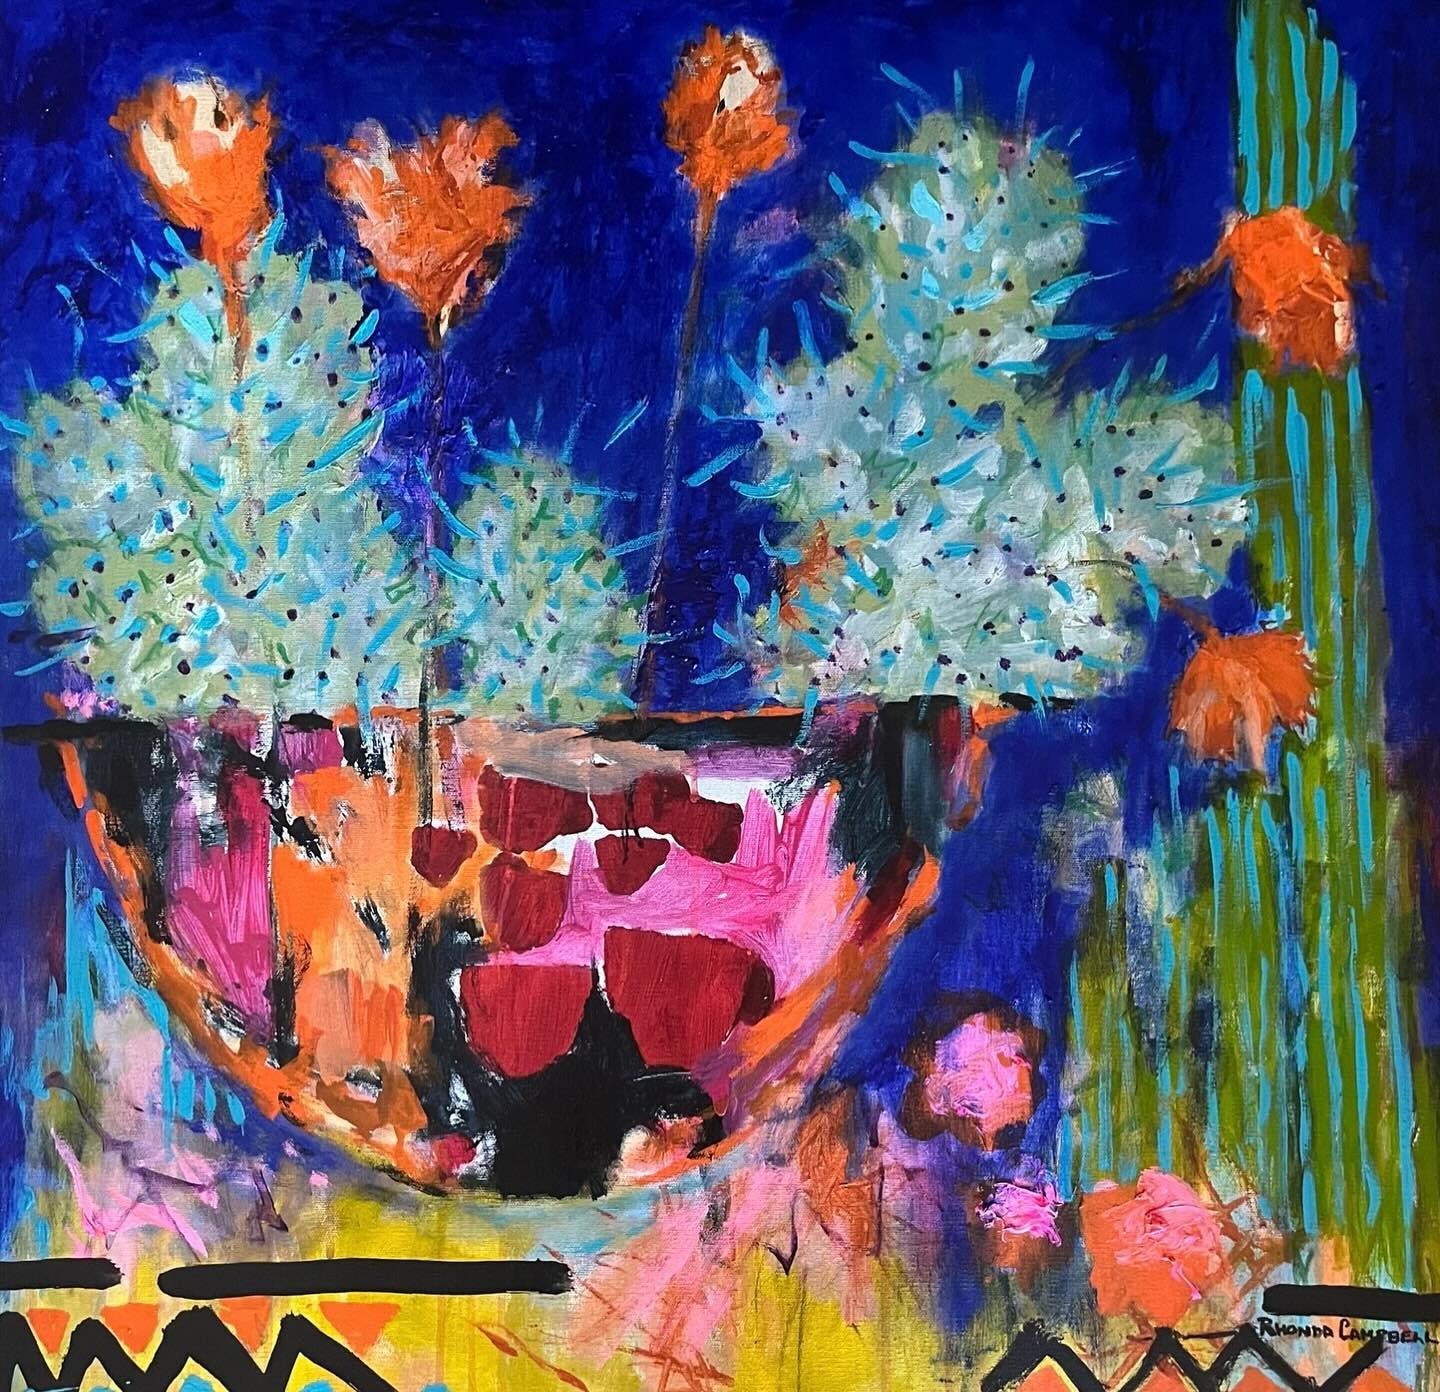 MEXICAN POT&hellip;🔴SOLD&hellip;.Acrylic,mixed media on canvas 80x80cm framed in Australian Oak&hellip;has left my studio for Sydney &hellip;many thanks to the collectors who have been collecting my work for some time now.
For more of this series,in